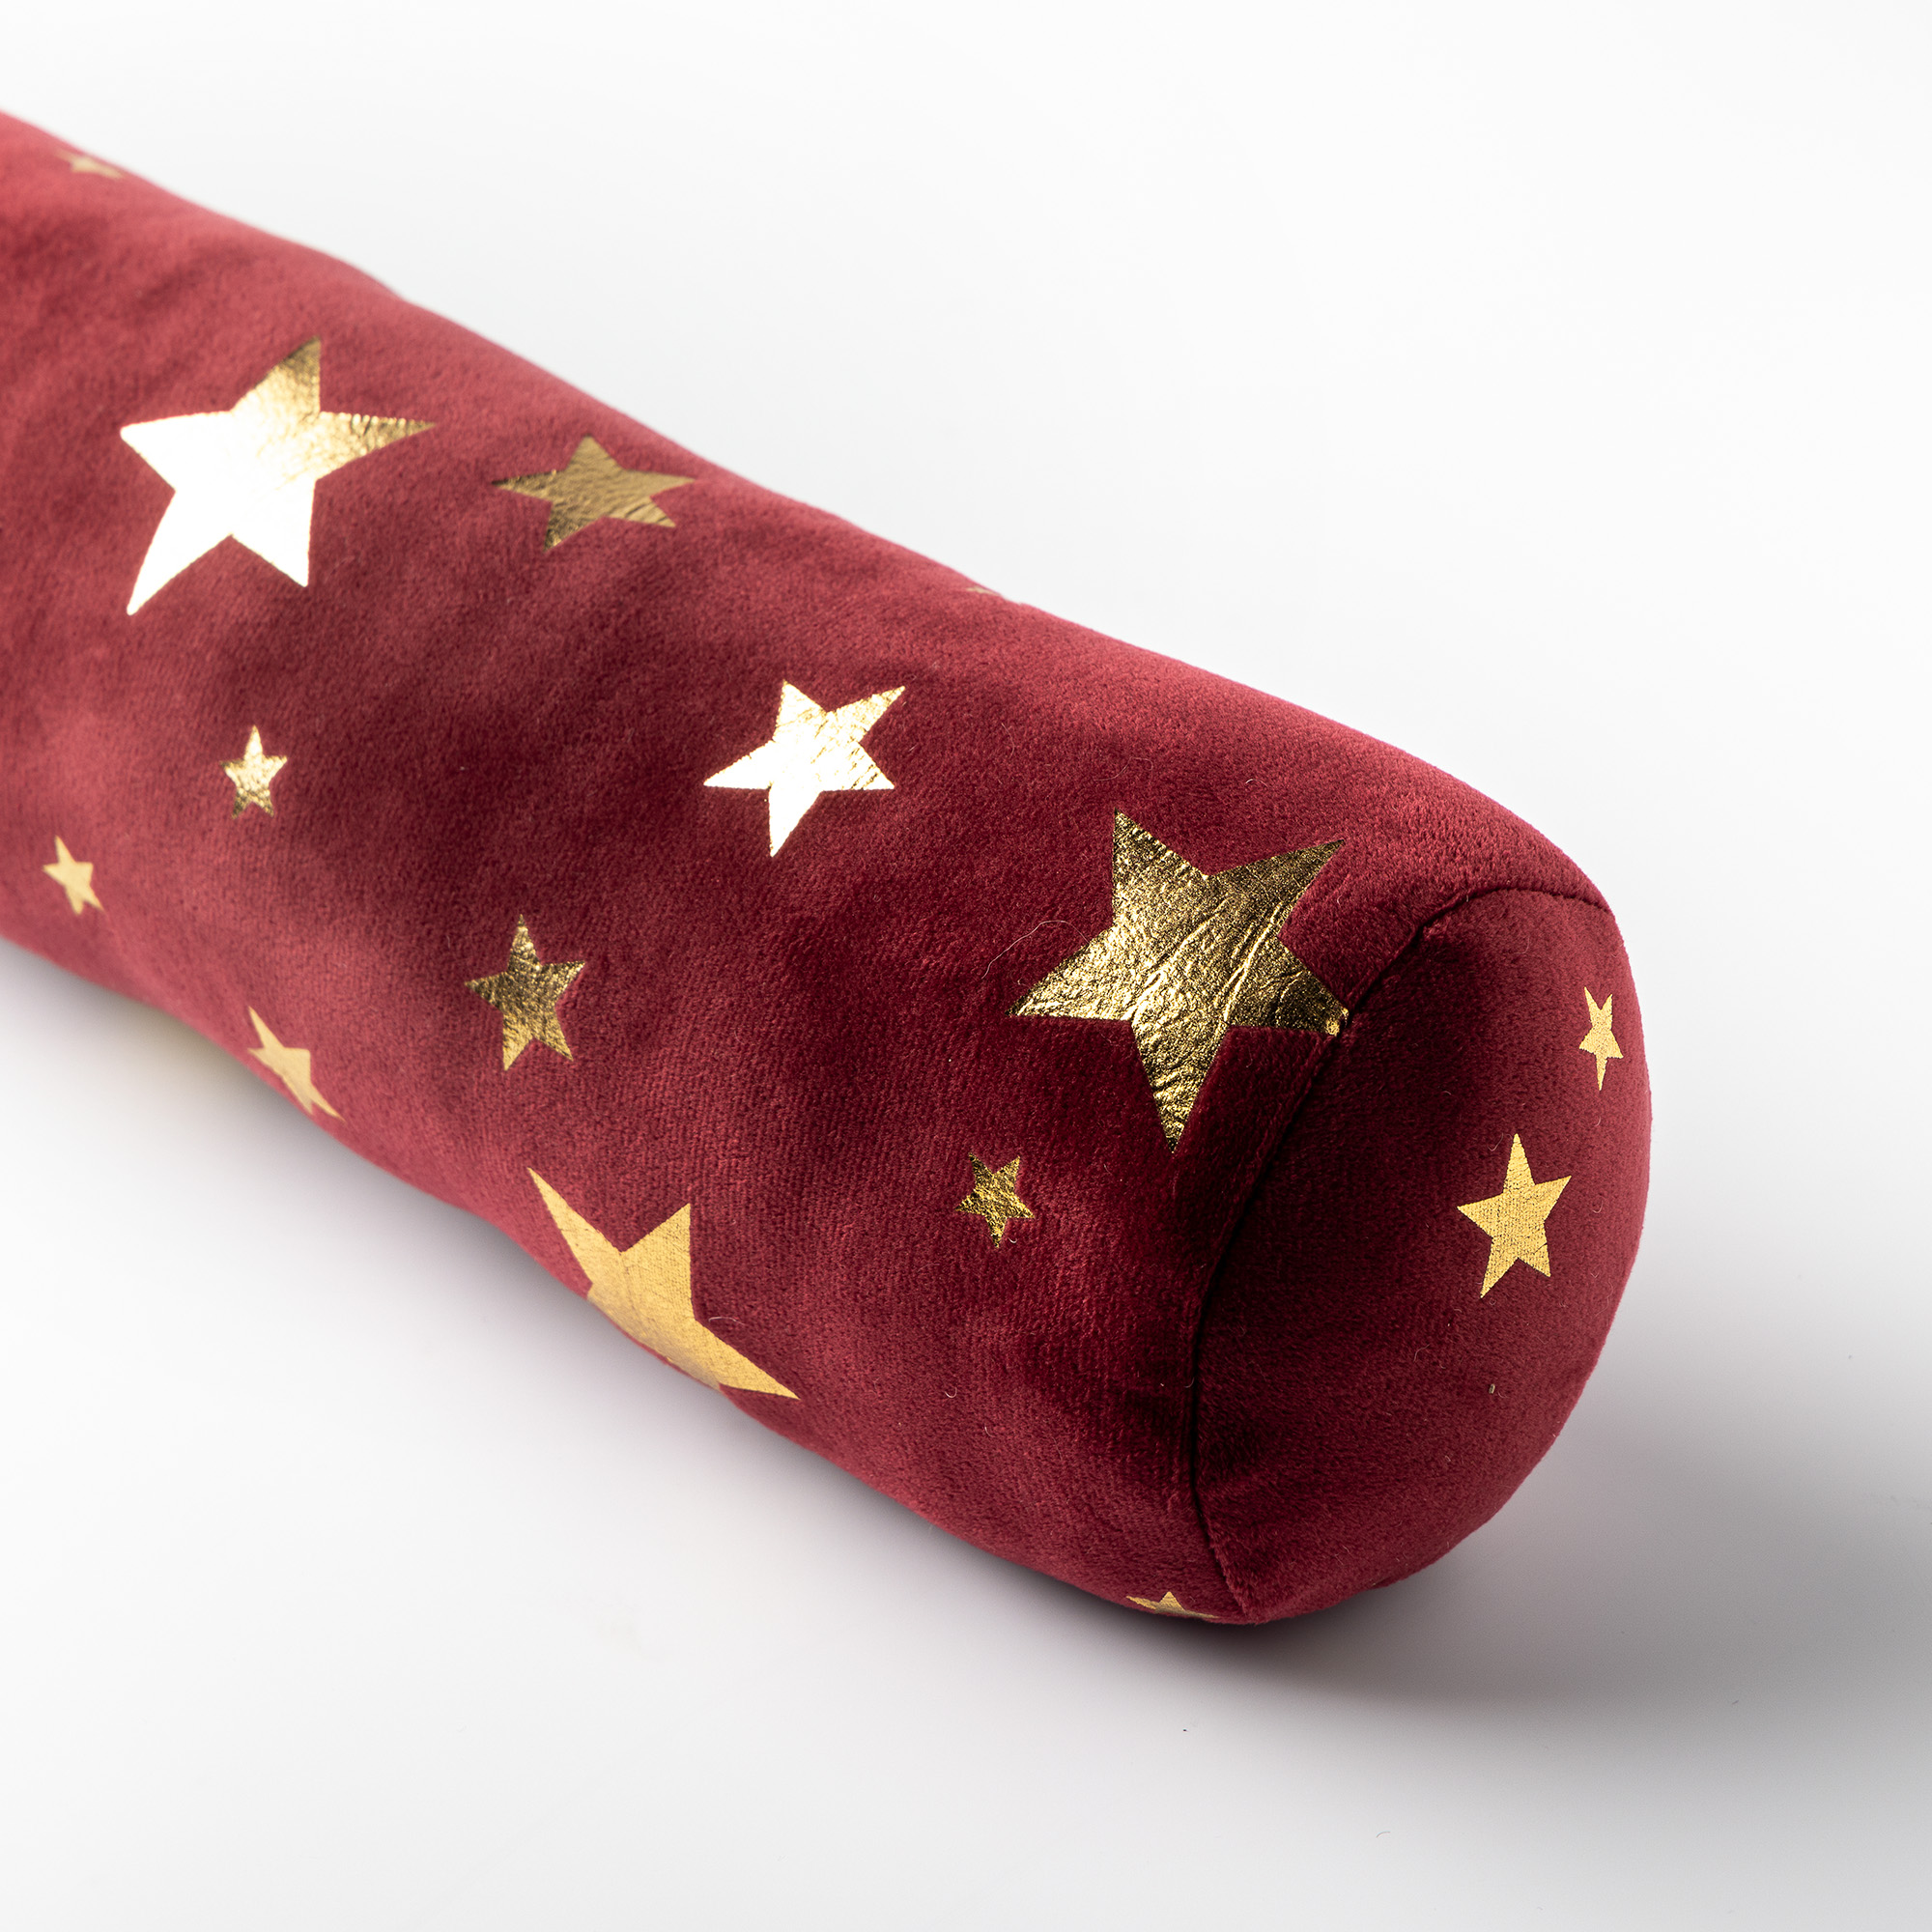 STARS - Draught excluder 90x10 cm – Door draught excluder with stars – Biking Red - red 